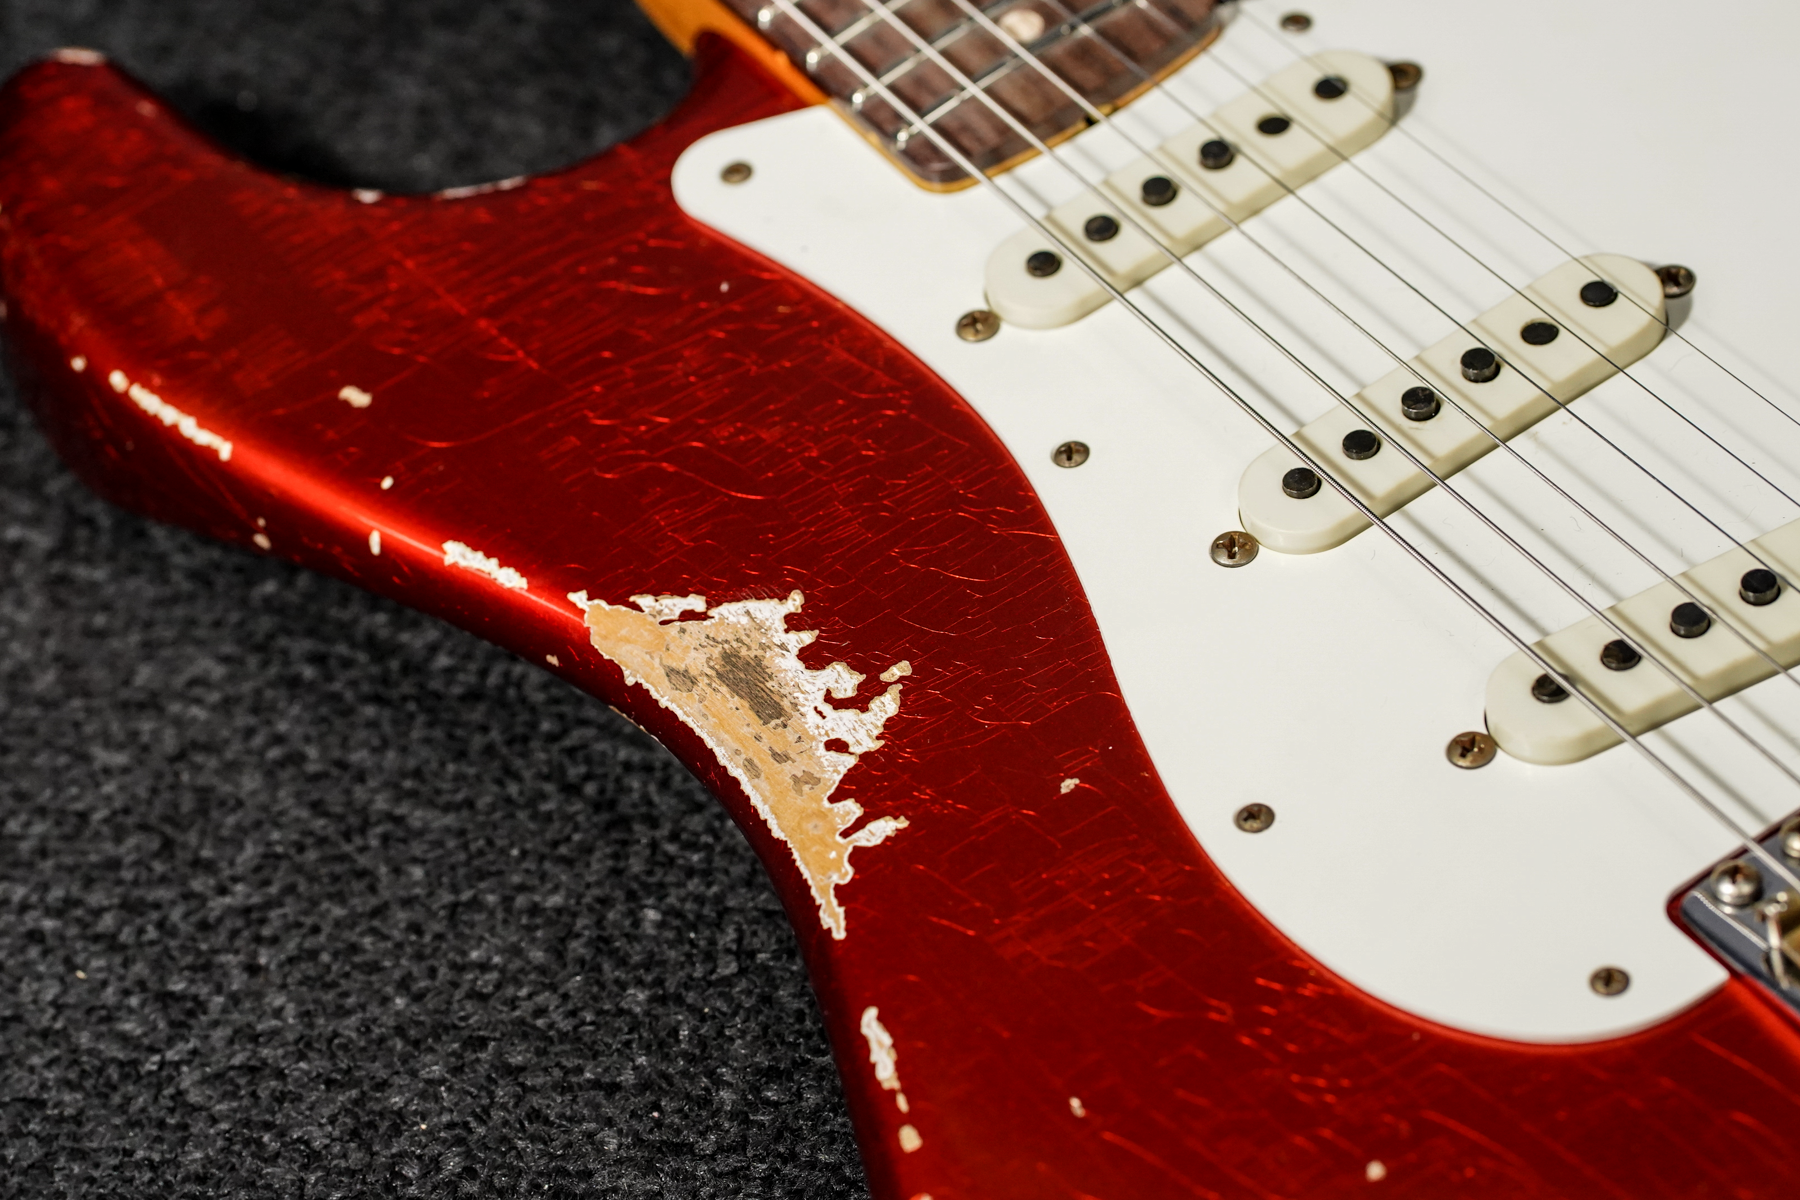 Custom Shop1959 Strat Heavy Relic SUPER FADED/AGED CANDY APPLE RED